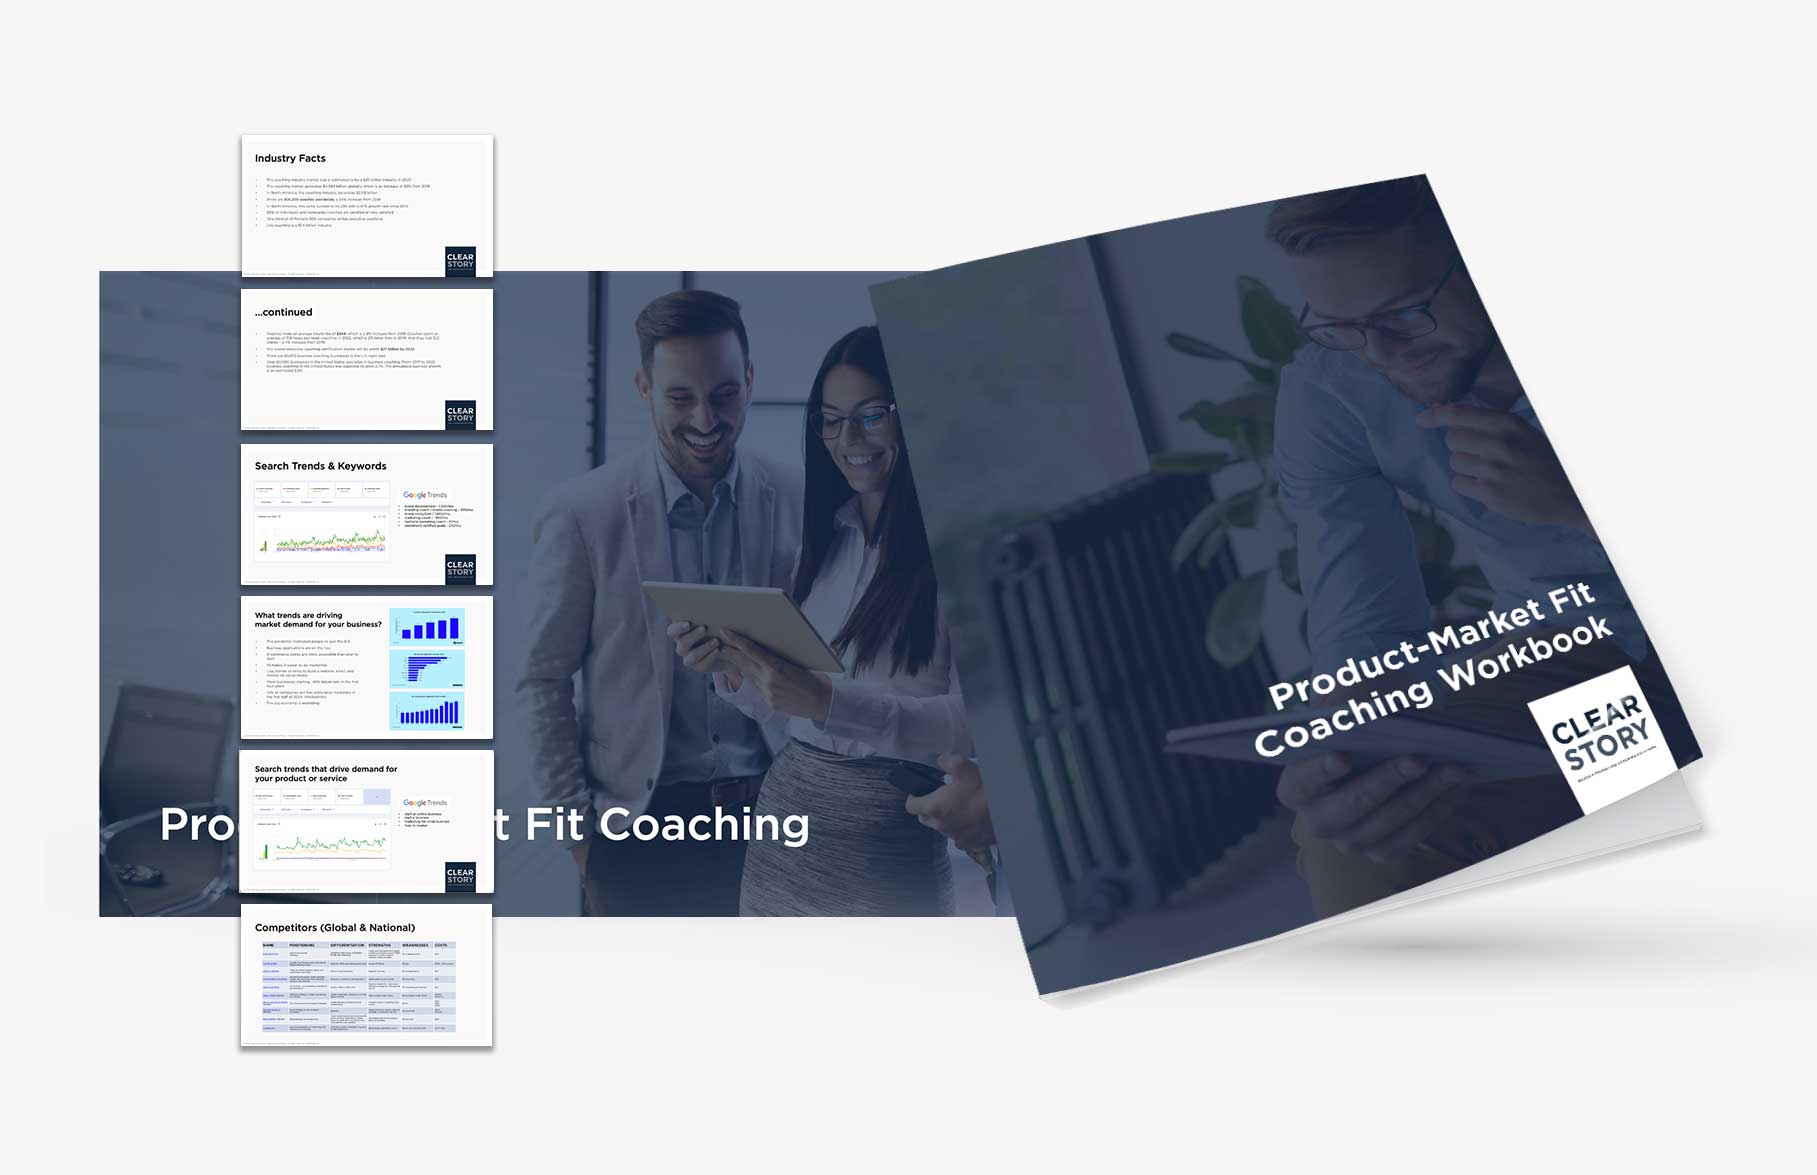 Product-Market Fit Coaching Materials